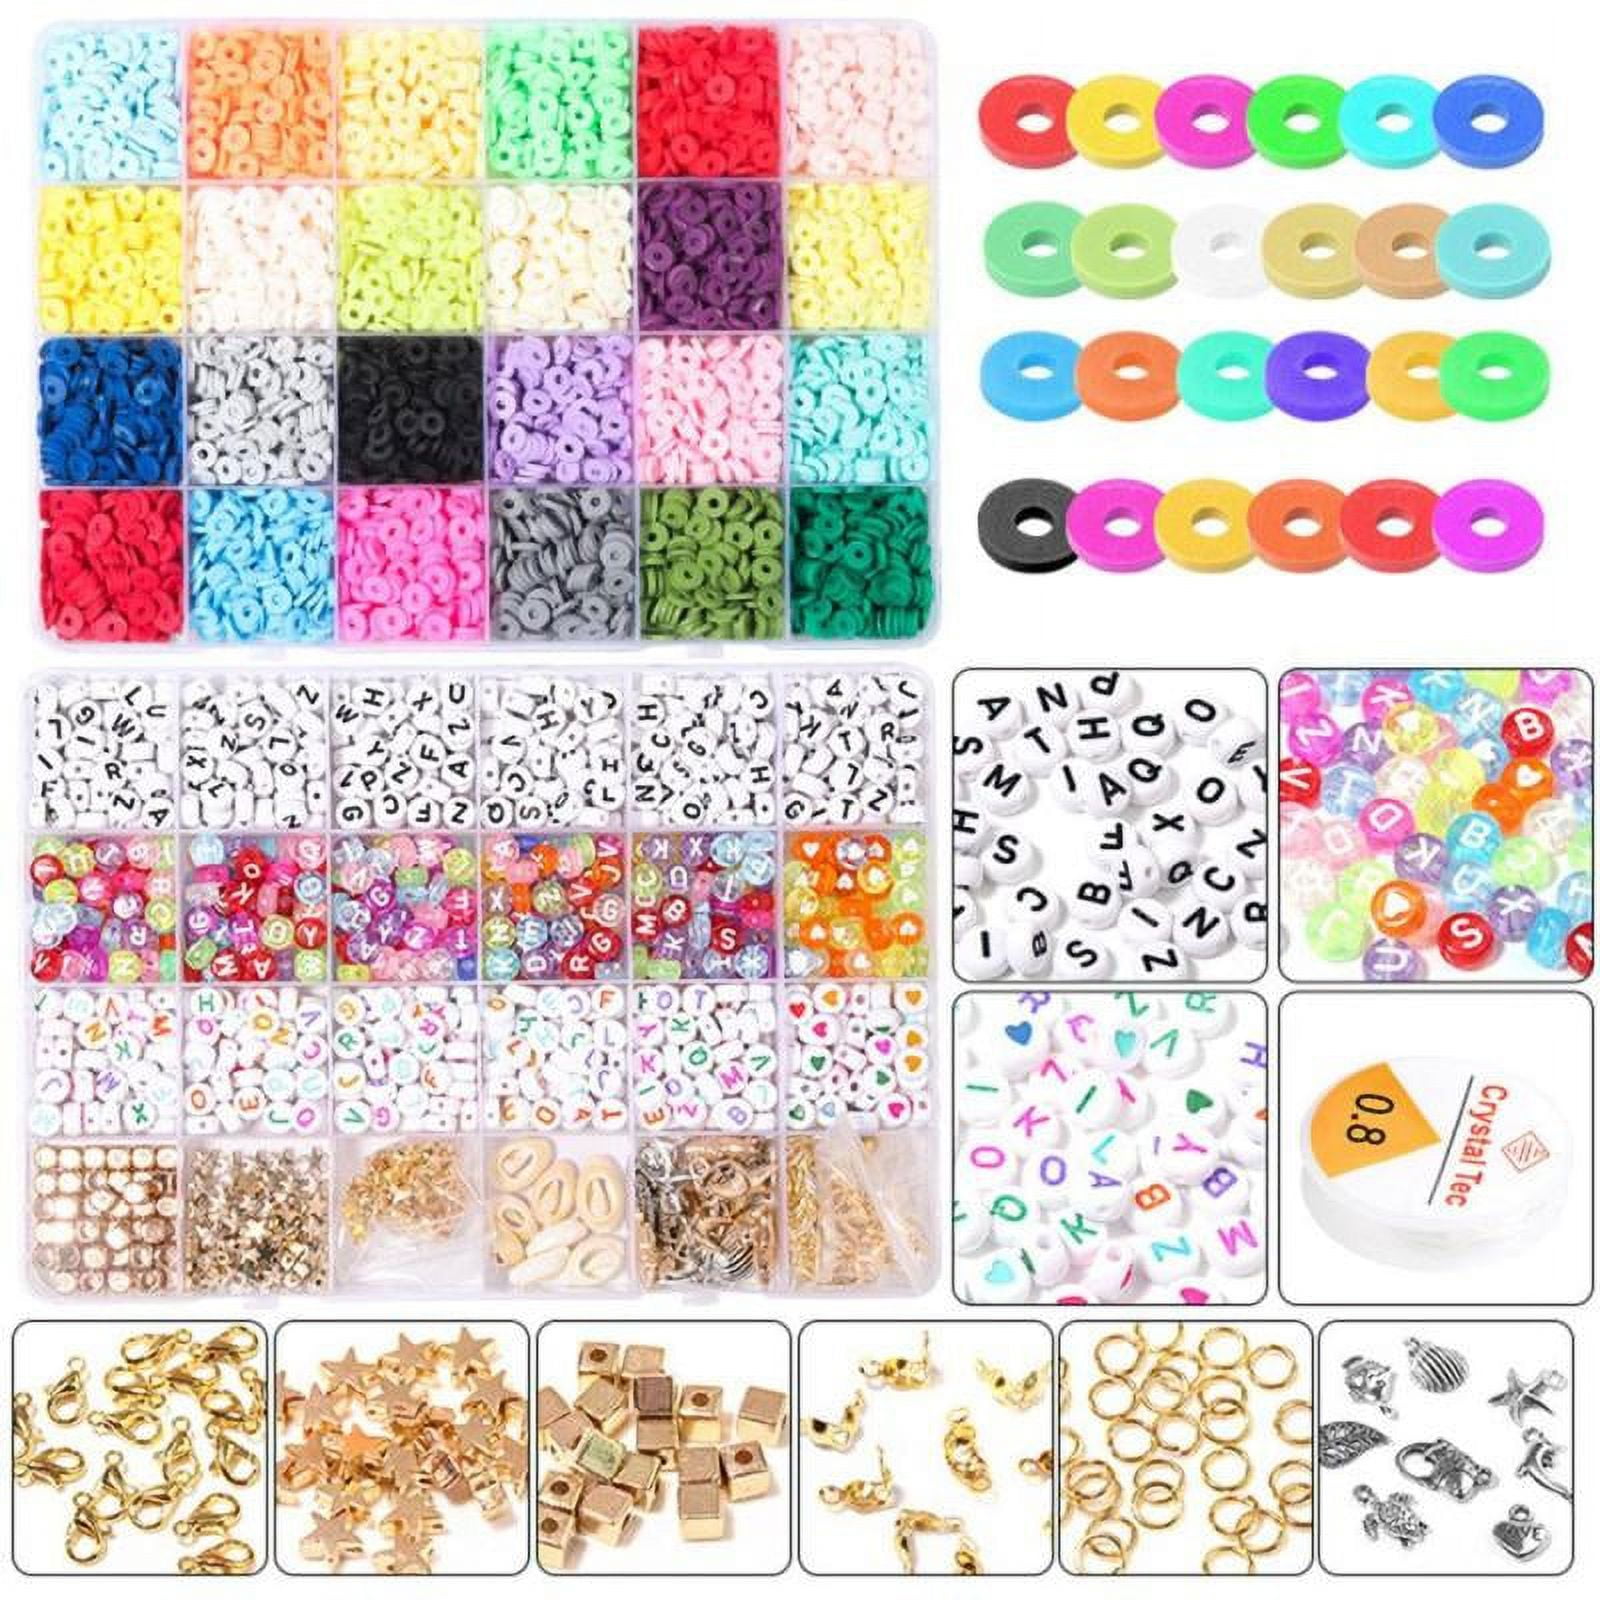 50pcs/pack Pendant Clasp Round Ccb Beads, Large Hole Spacer Beads